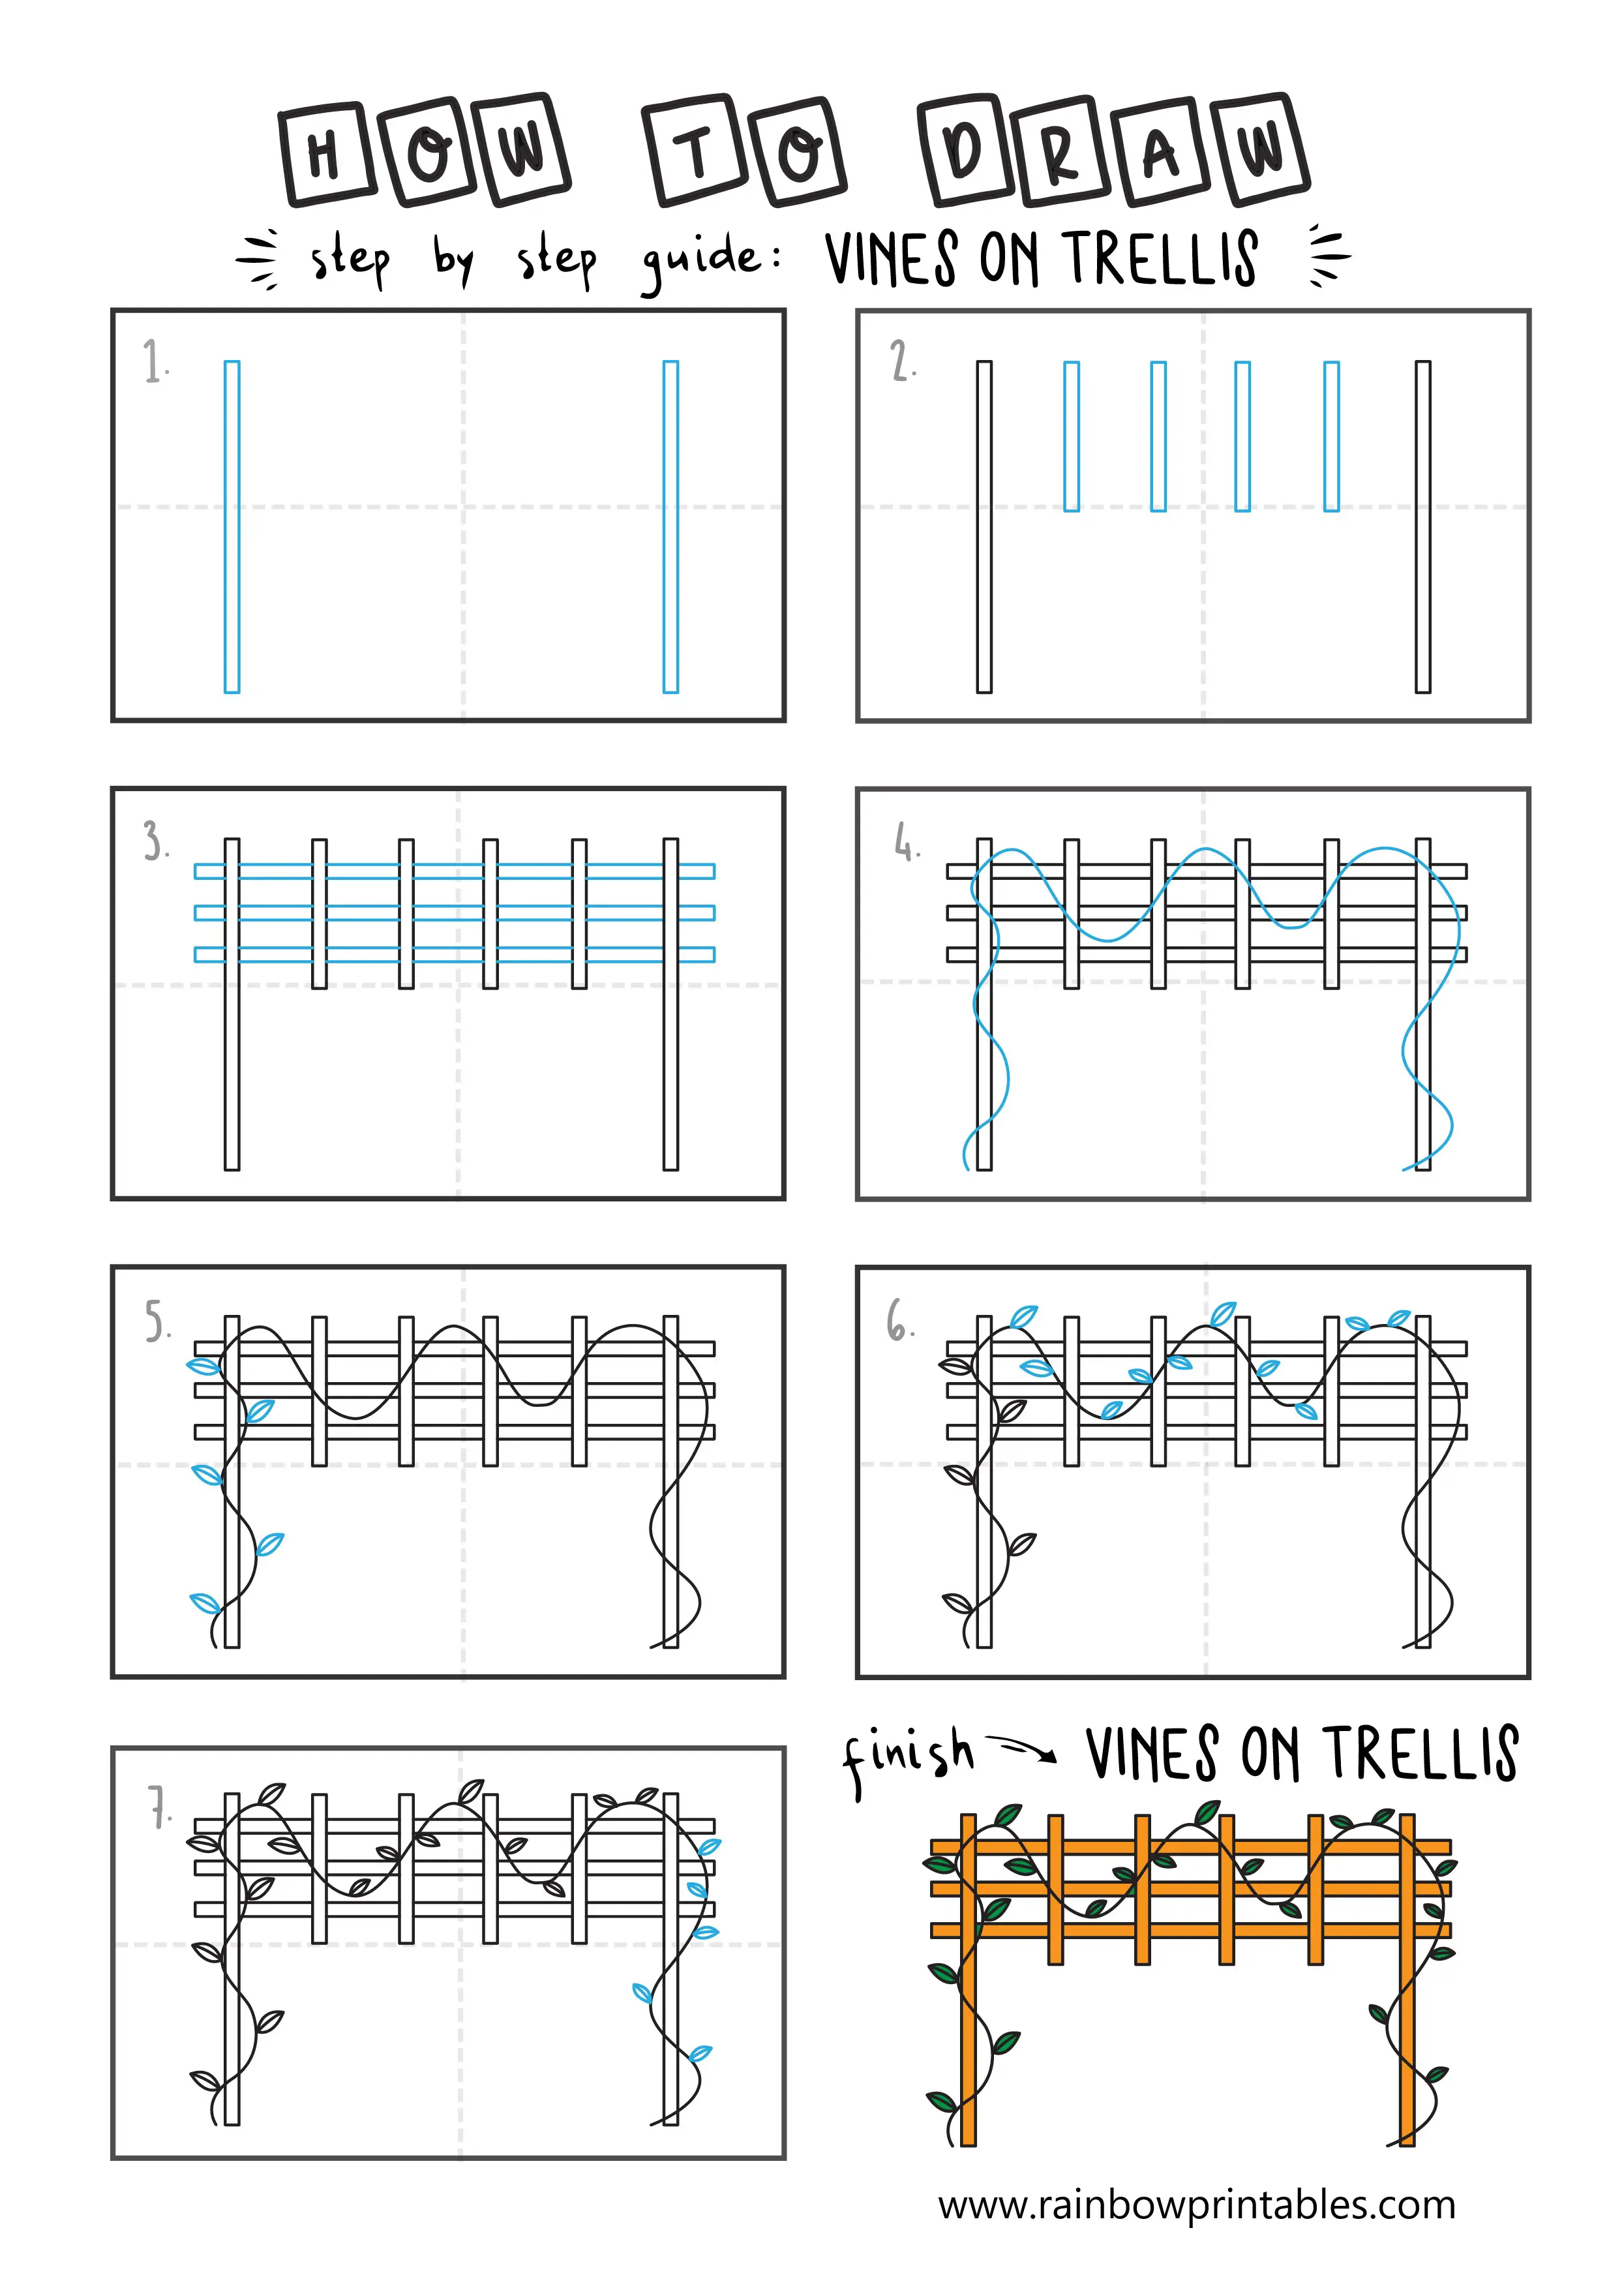 How To Draw a VINE ON TRELLIS Easy Step By Step For Kids Illustration Art Ideas